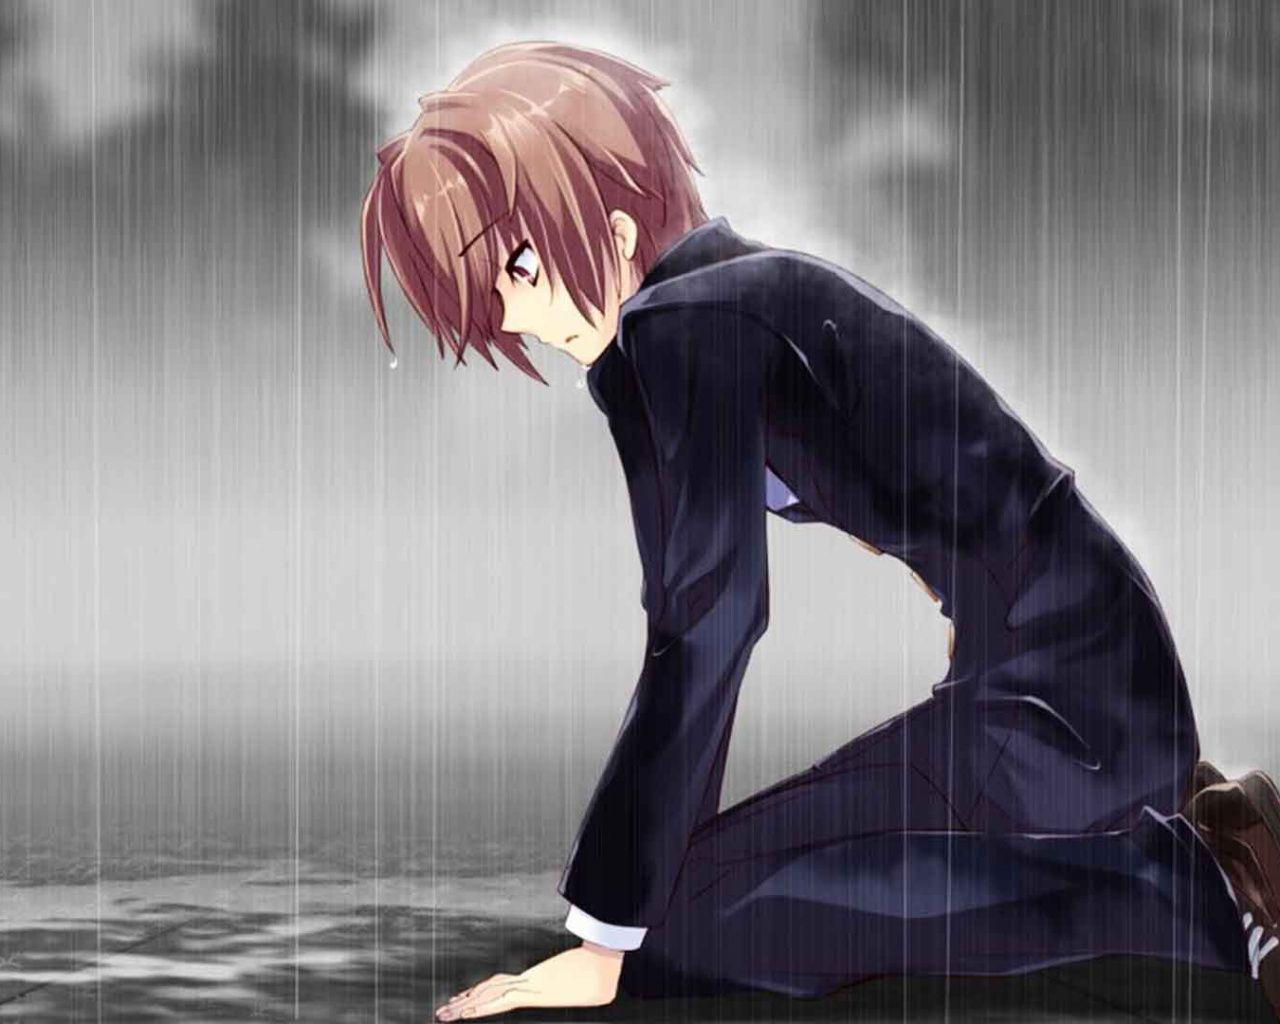 52 Images About Anime Boy Or Girl Sad  On We Heart  Anime  948x1280 PNG  Download  PNGkit